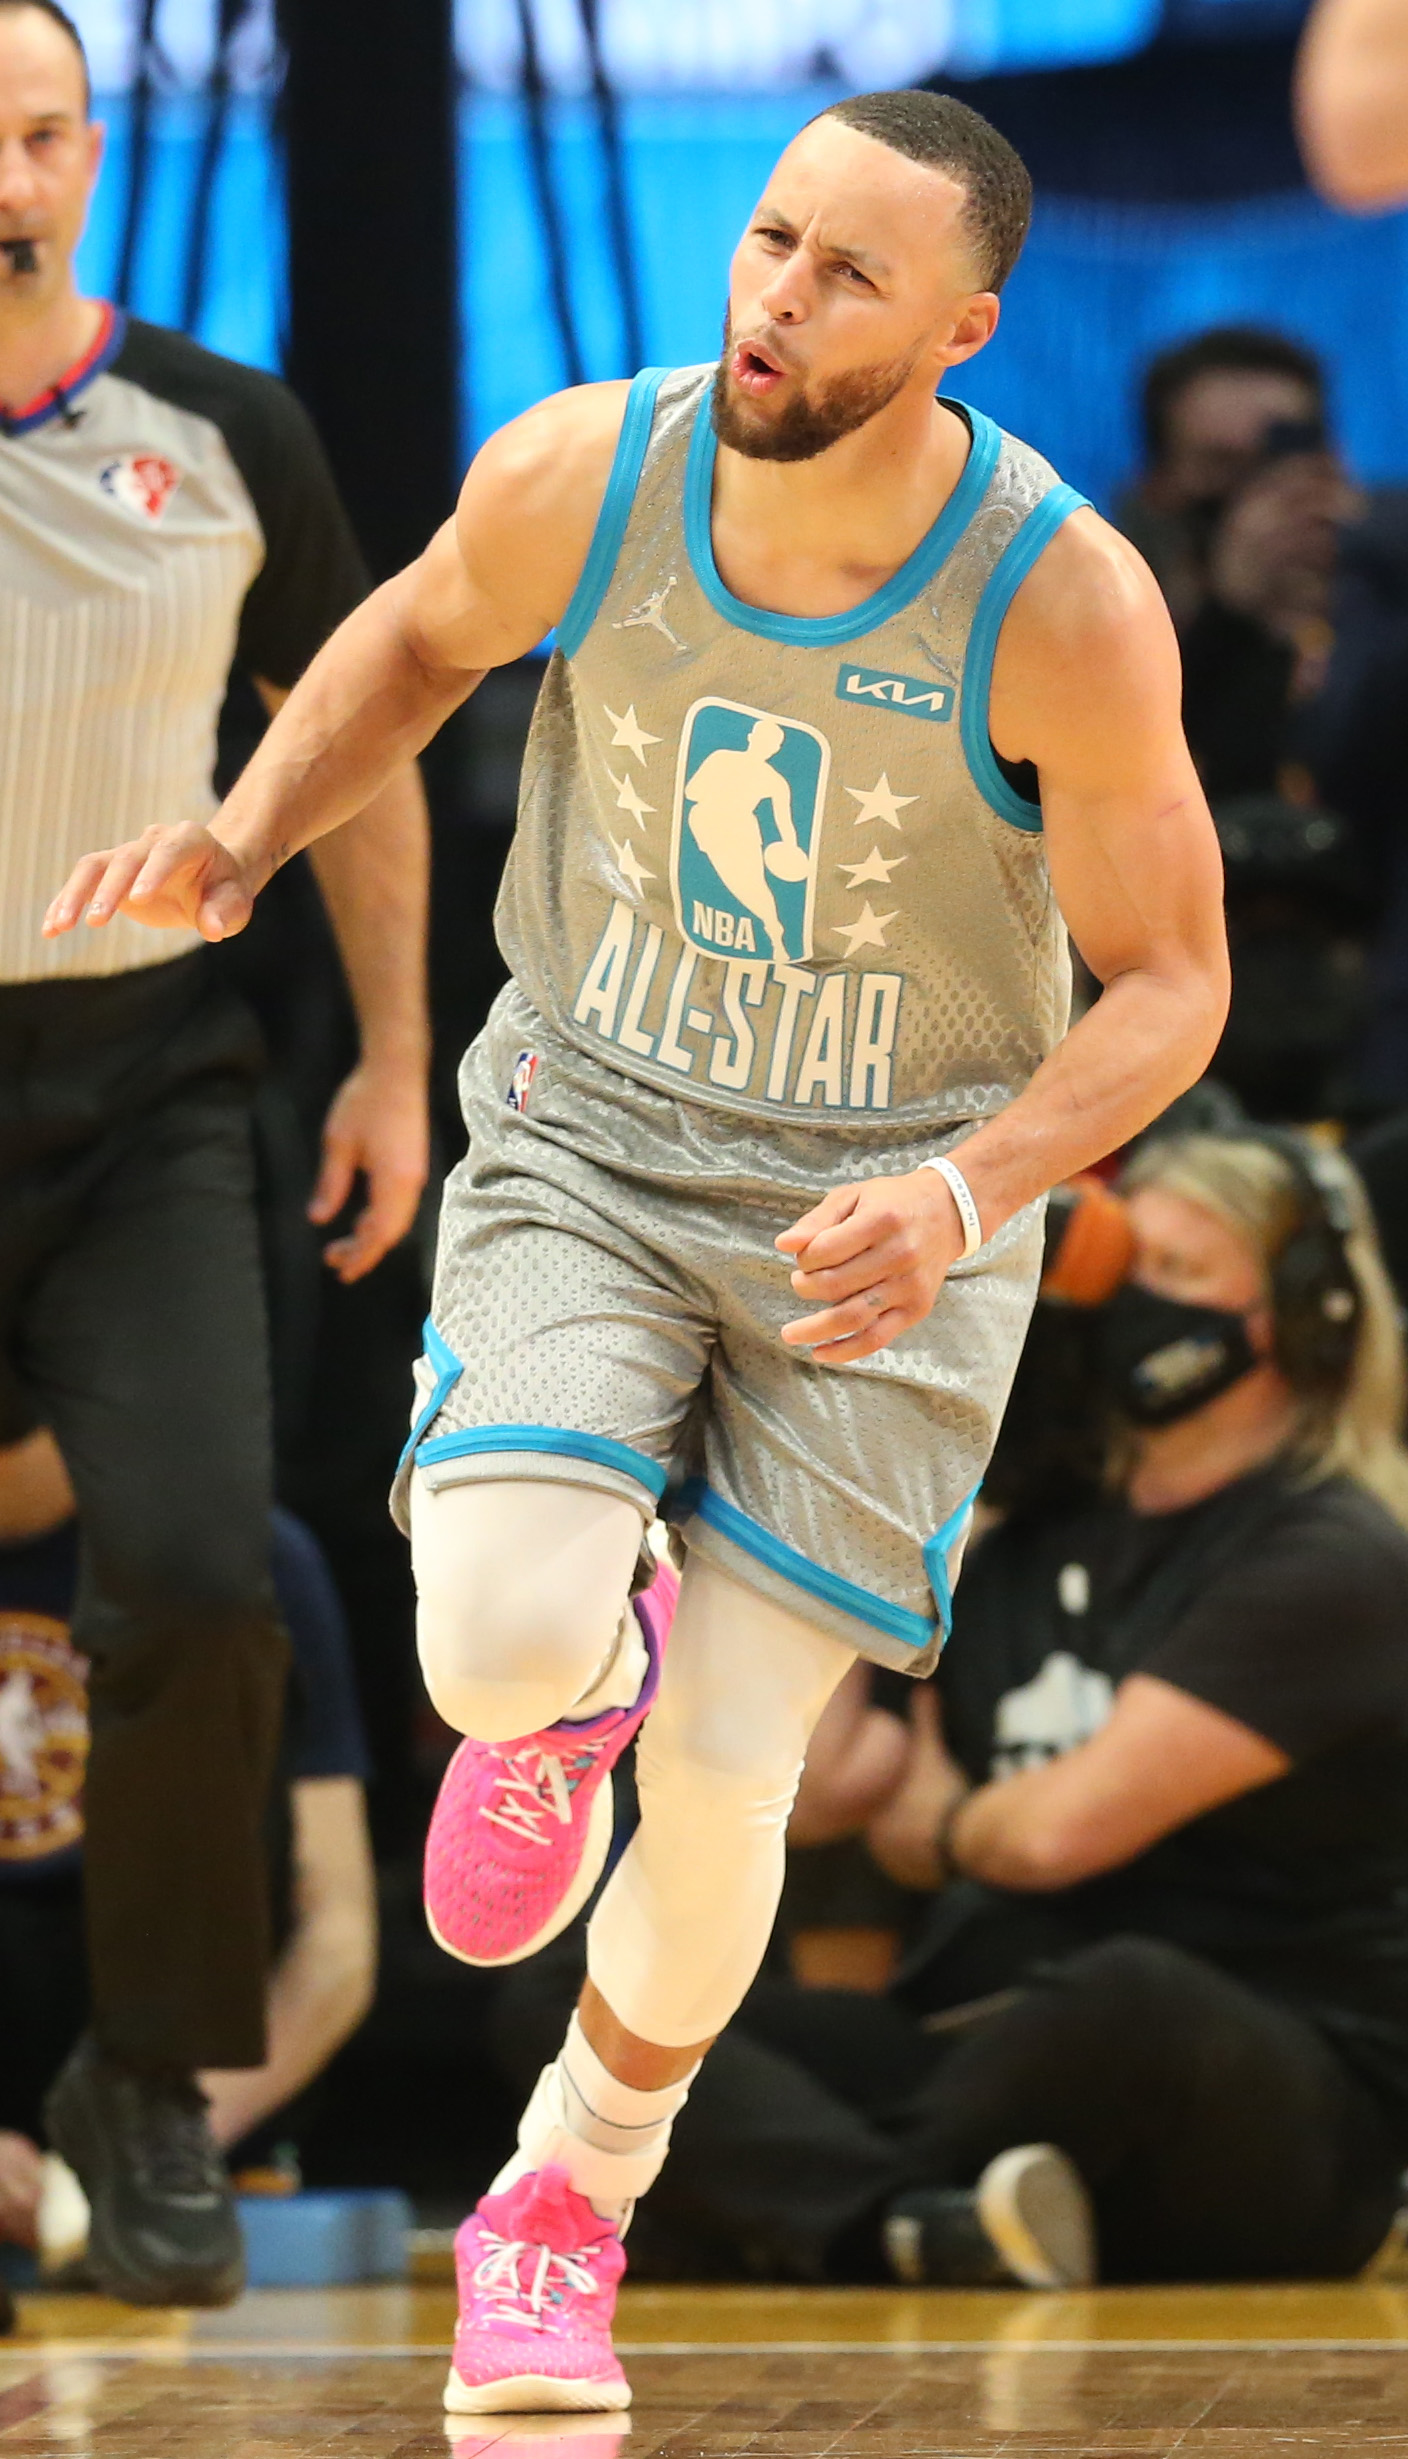 2022 NBA All-Star Game MVP winner: Stephen Curry drops 50 points